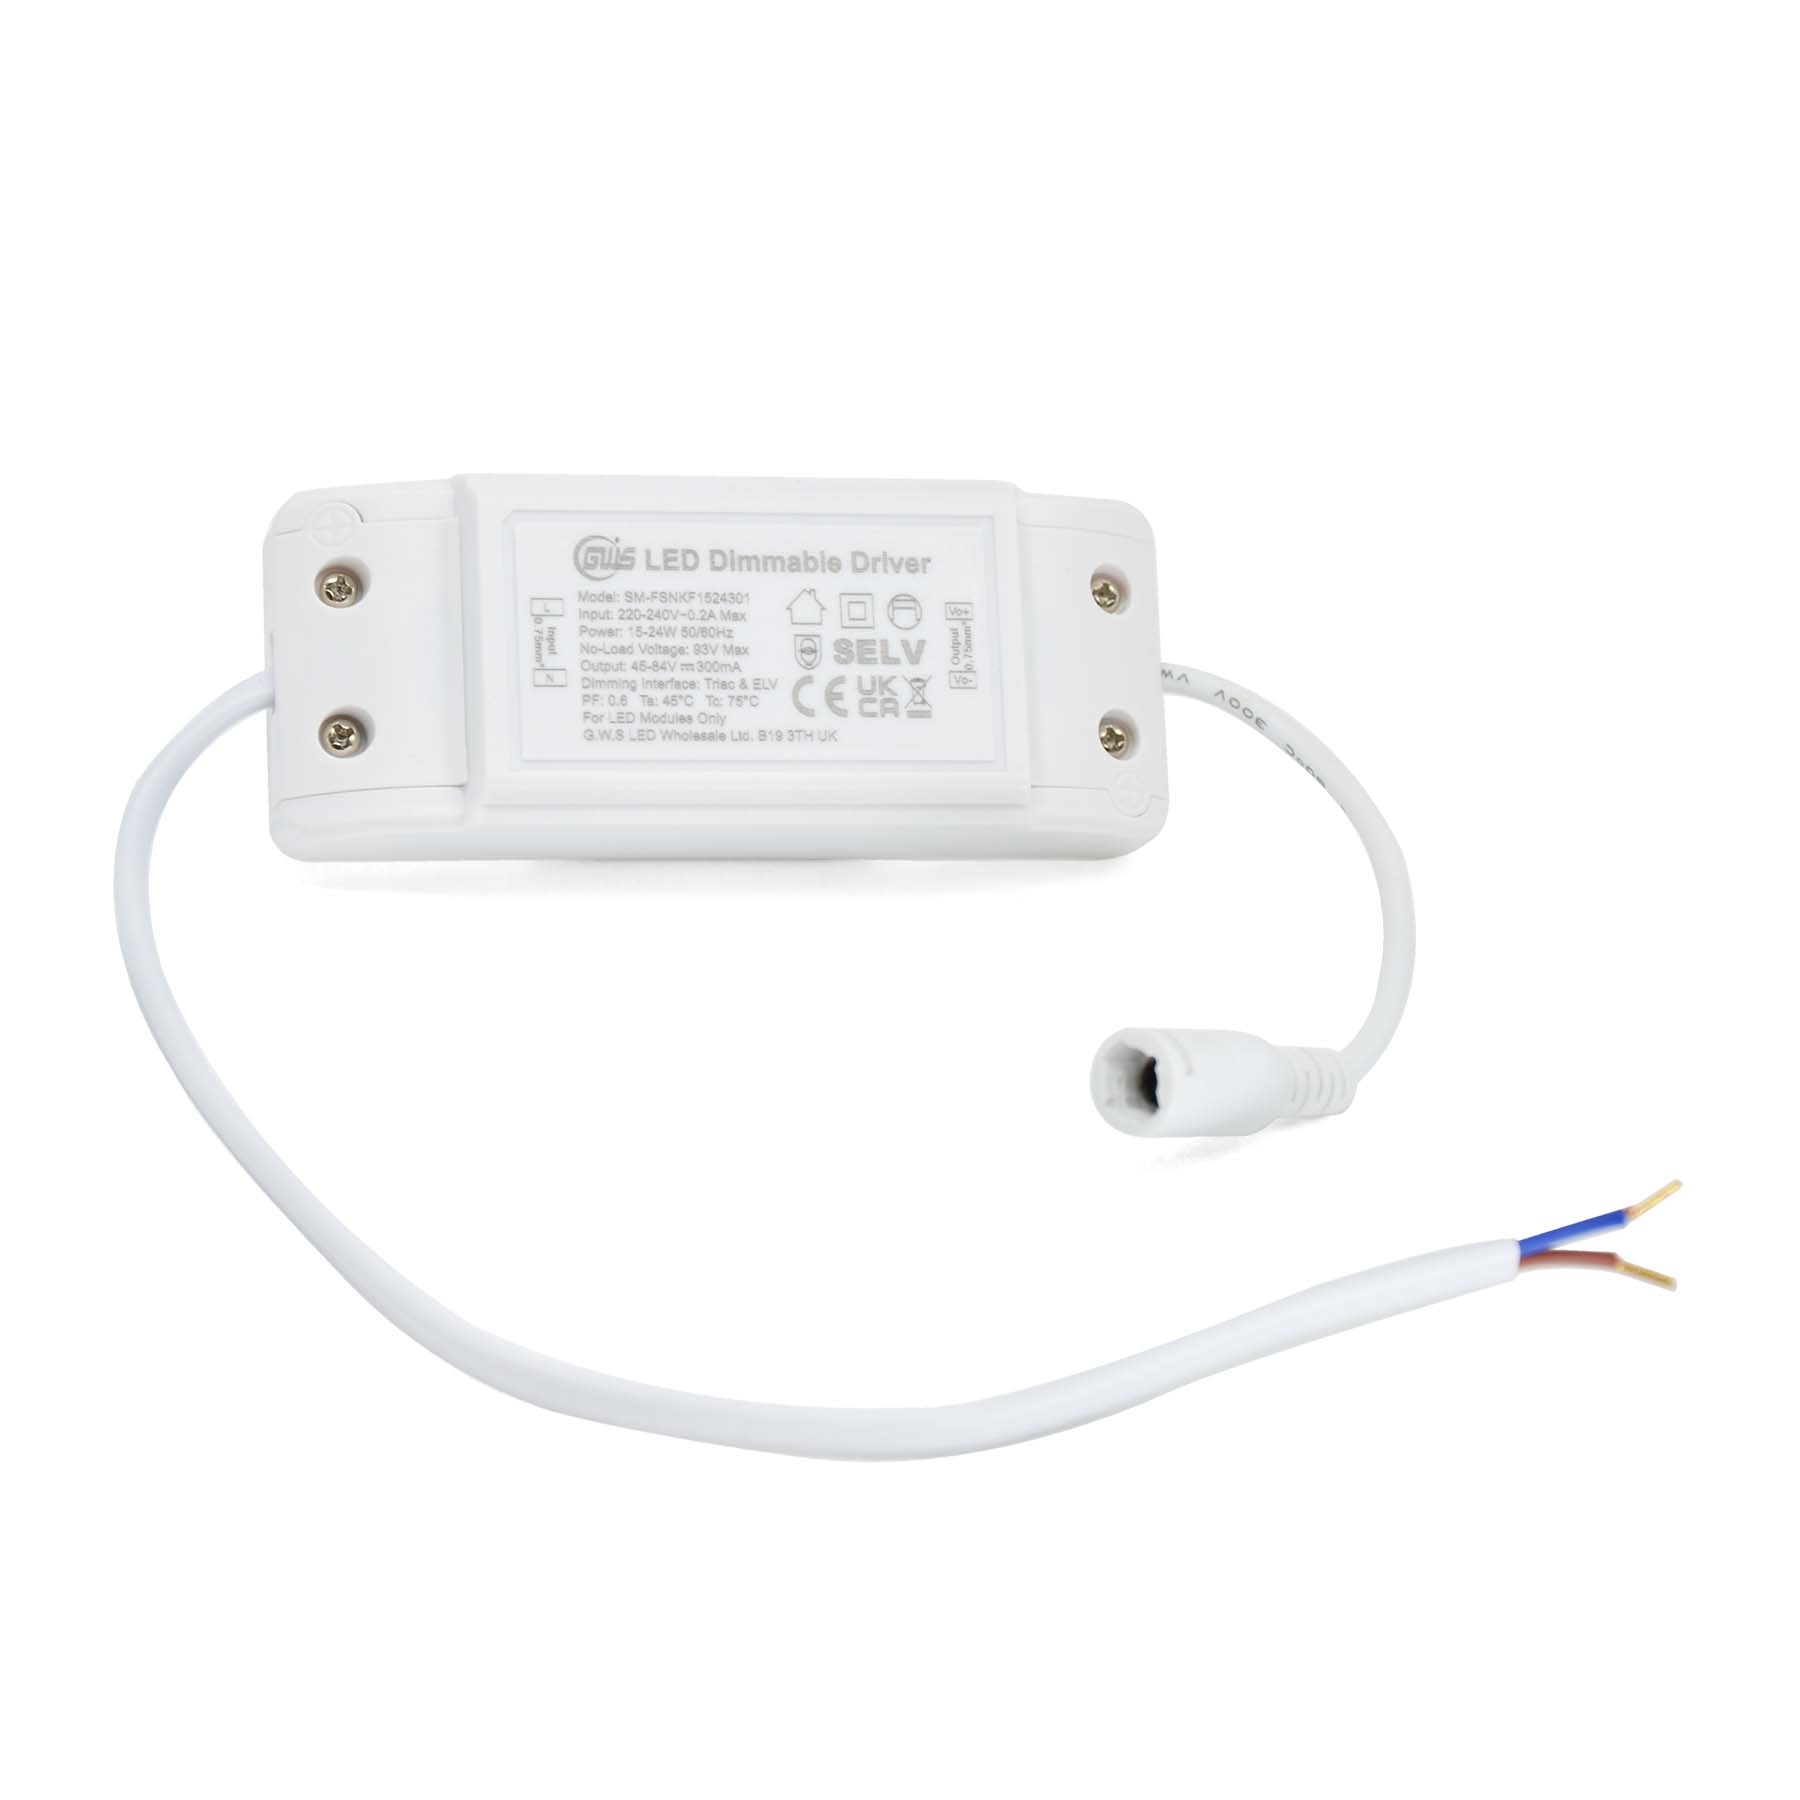 G.W.S LED Wholesale LED Drivers/LED Power Supplies Triac Constant Current LED Dimmable Driver 15-24W